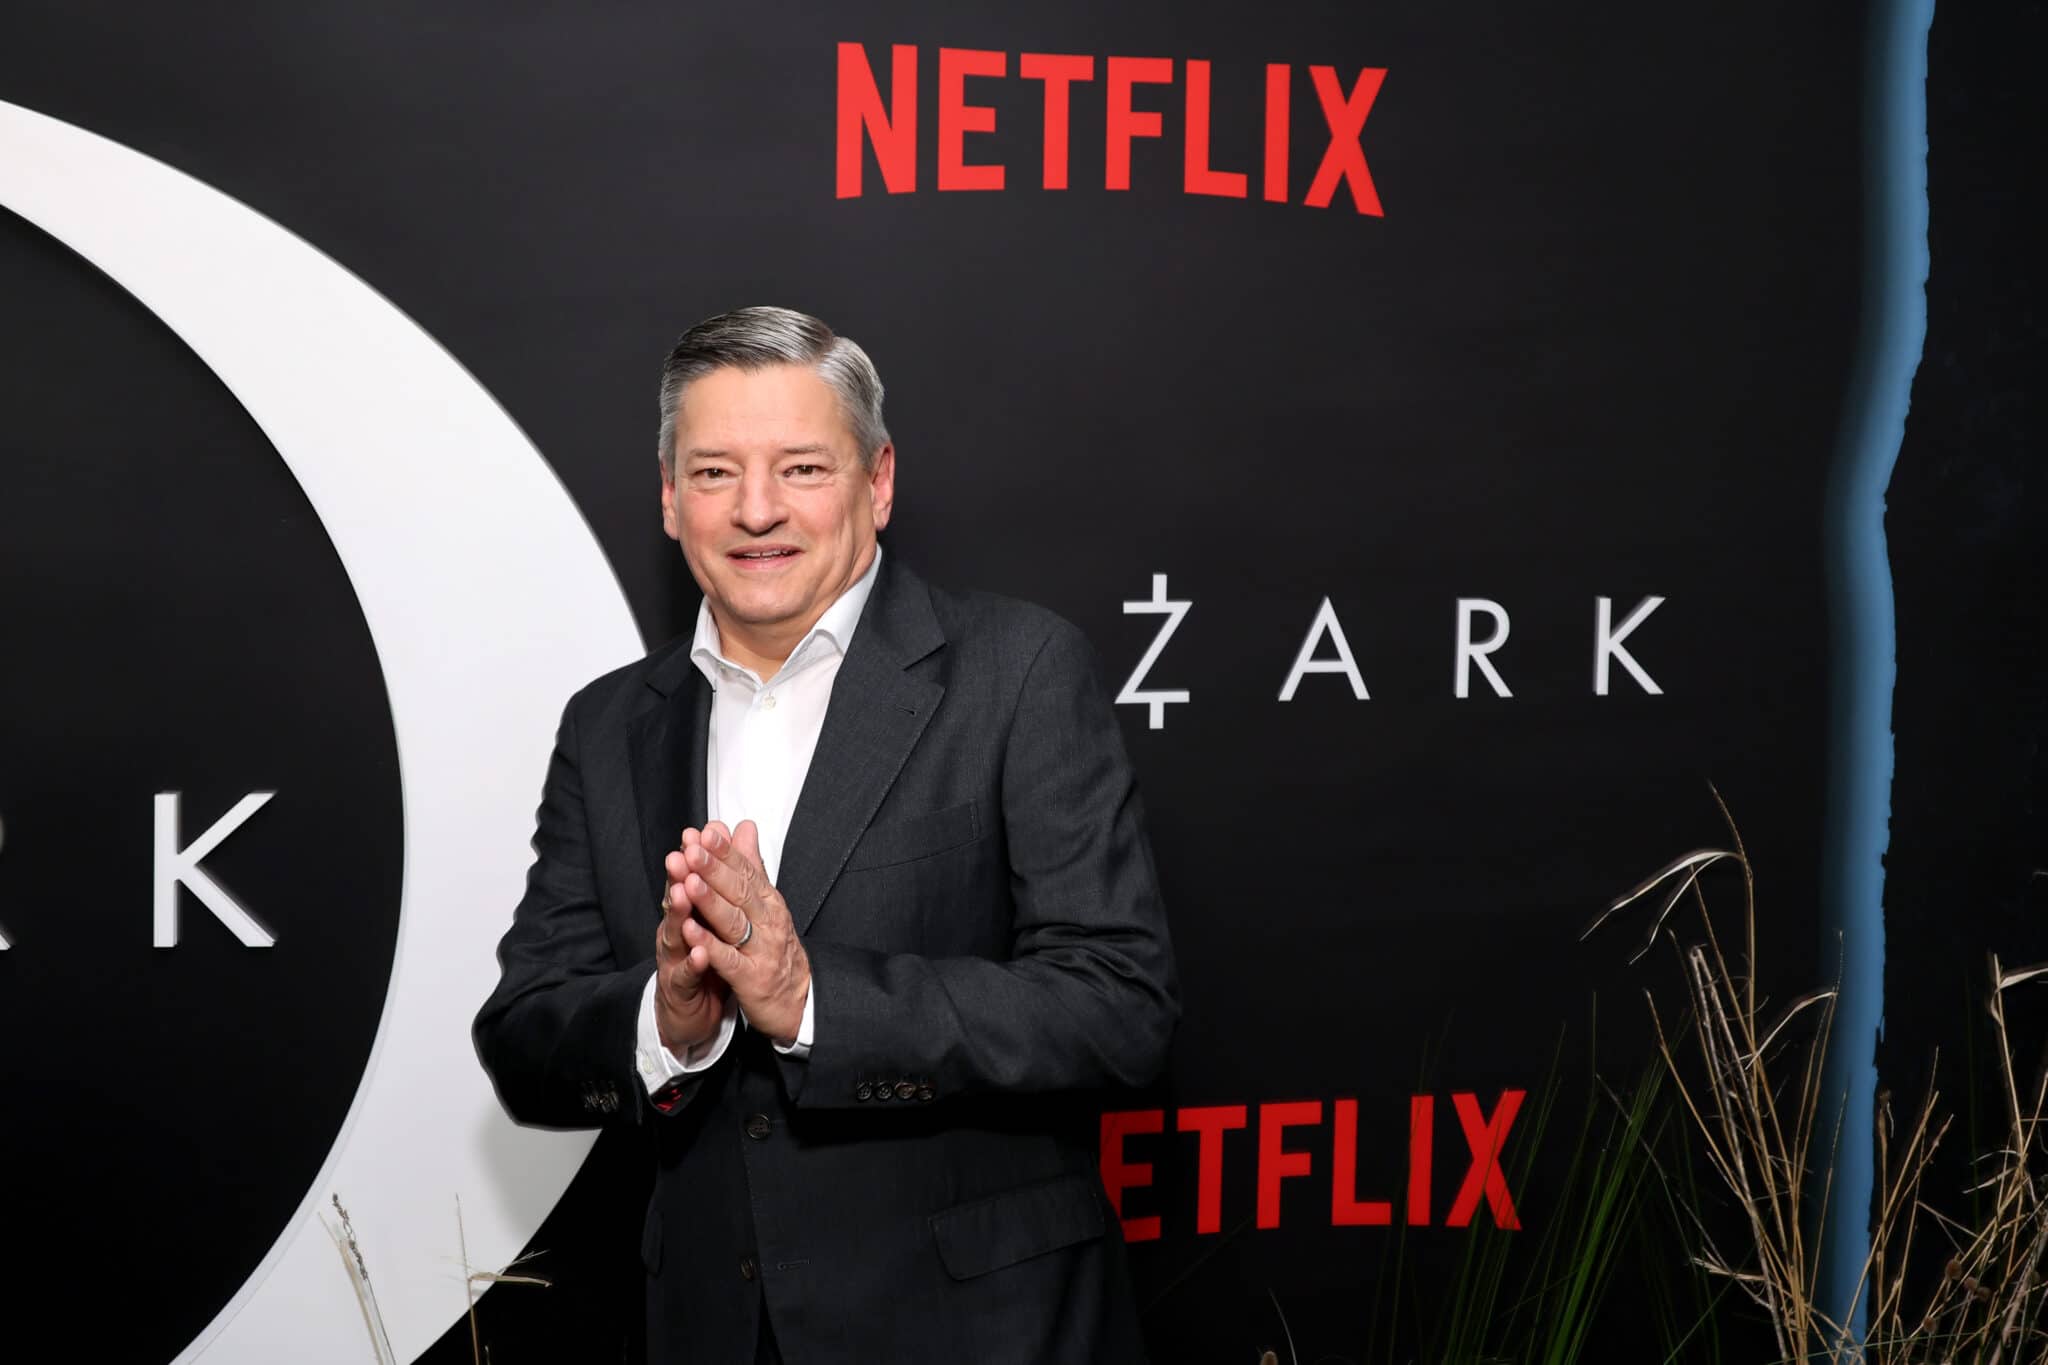 Netflix co-CEO Ted Sarandos on the red carpet